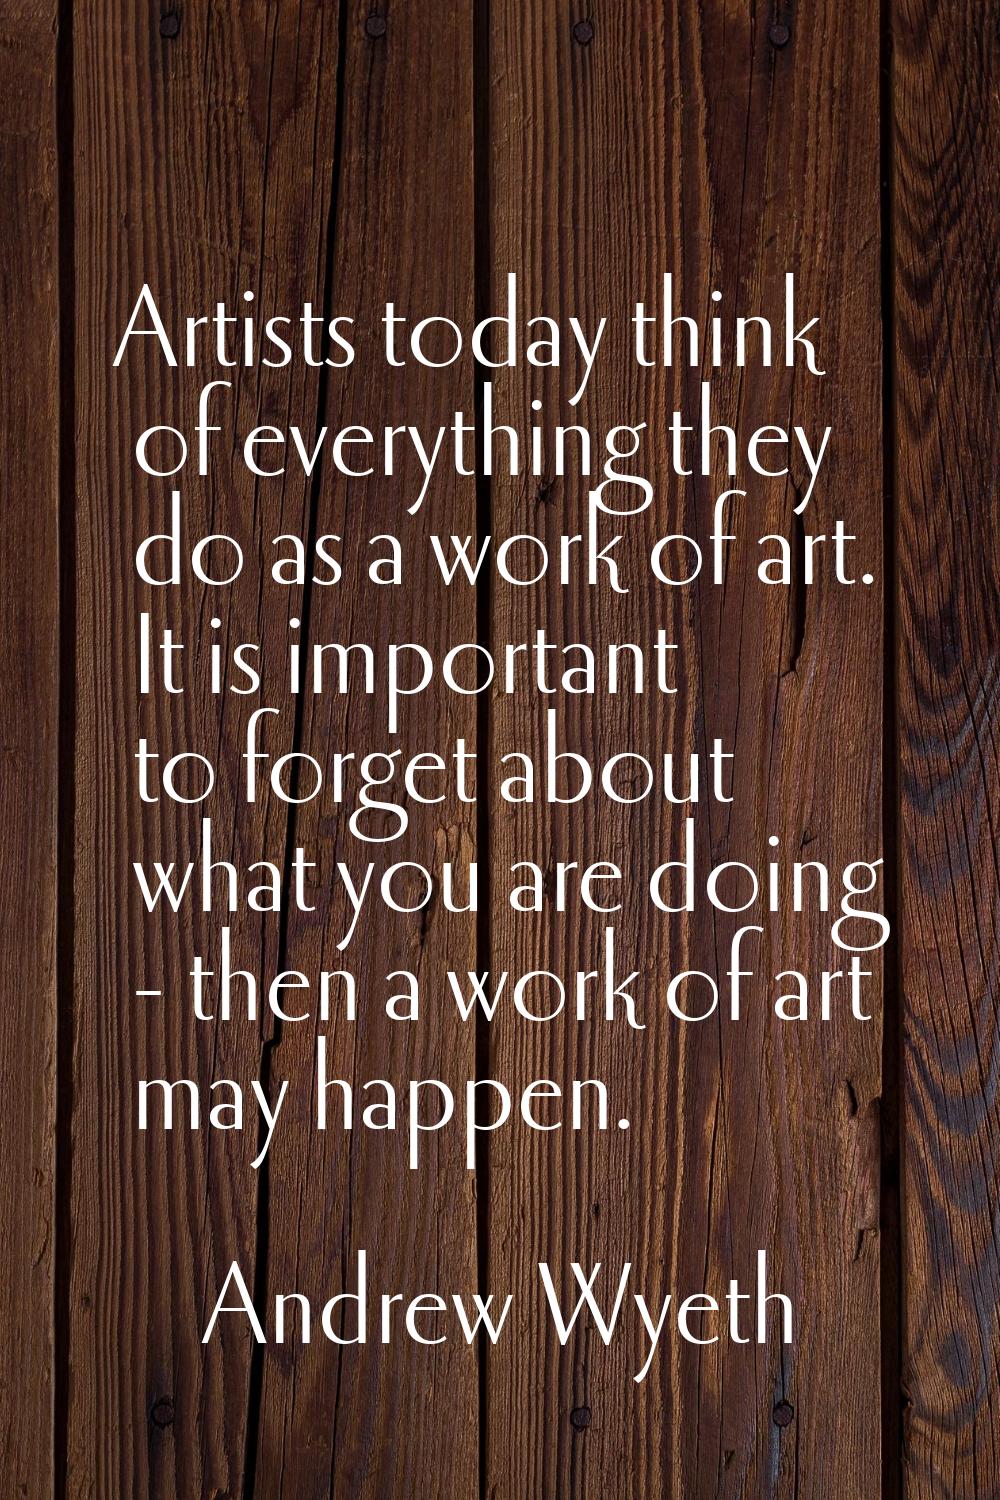 Artists today think of everything they do as a work of art. It is important to forget about what yo